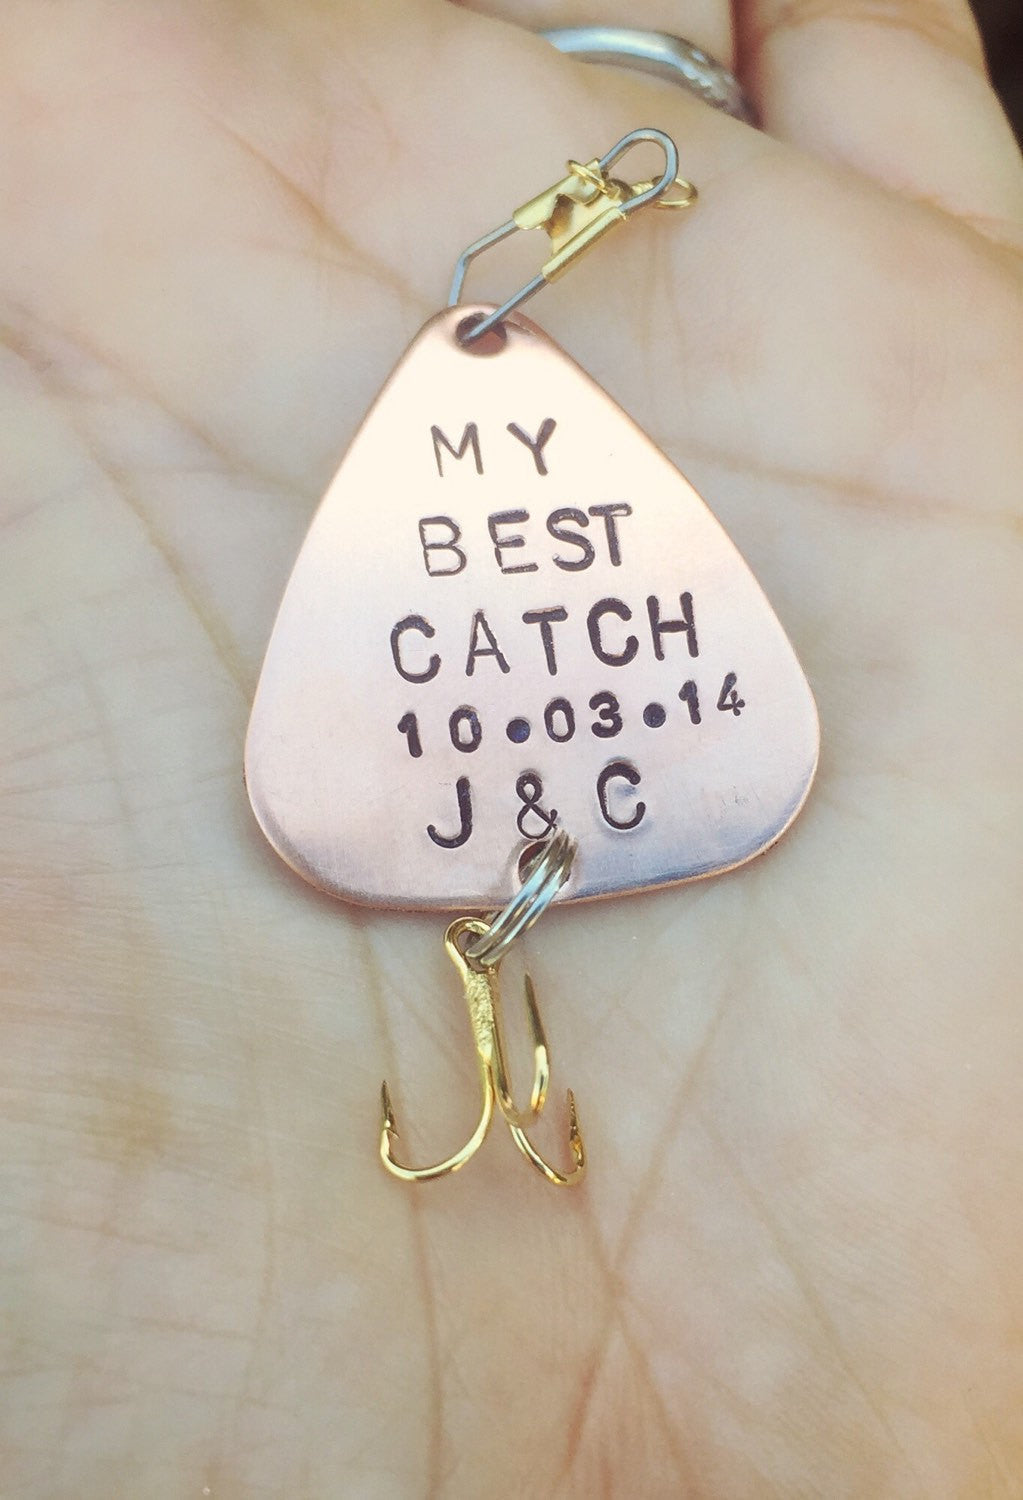 Fishing Lure,  Valentine Gift, For Him, Boyfriend Gift, Personalized Fishing Lure, Hand Stamped Fishing Lure,natashaaloha, Boyfriend Gift - Natashaaloha, jewelry, bracelets, necklace, keychains, fishing lures, gifts for men, charms, personalized, 